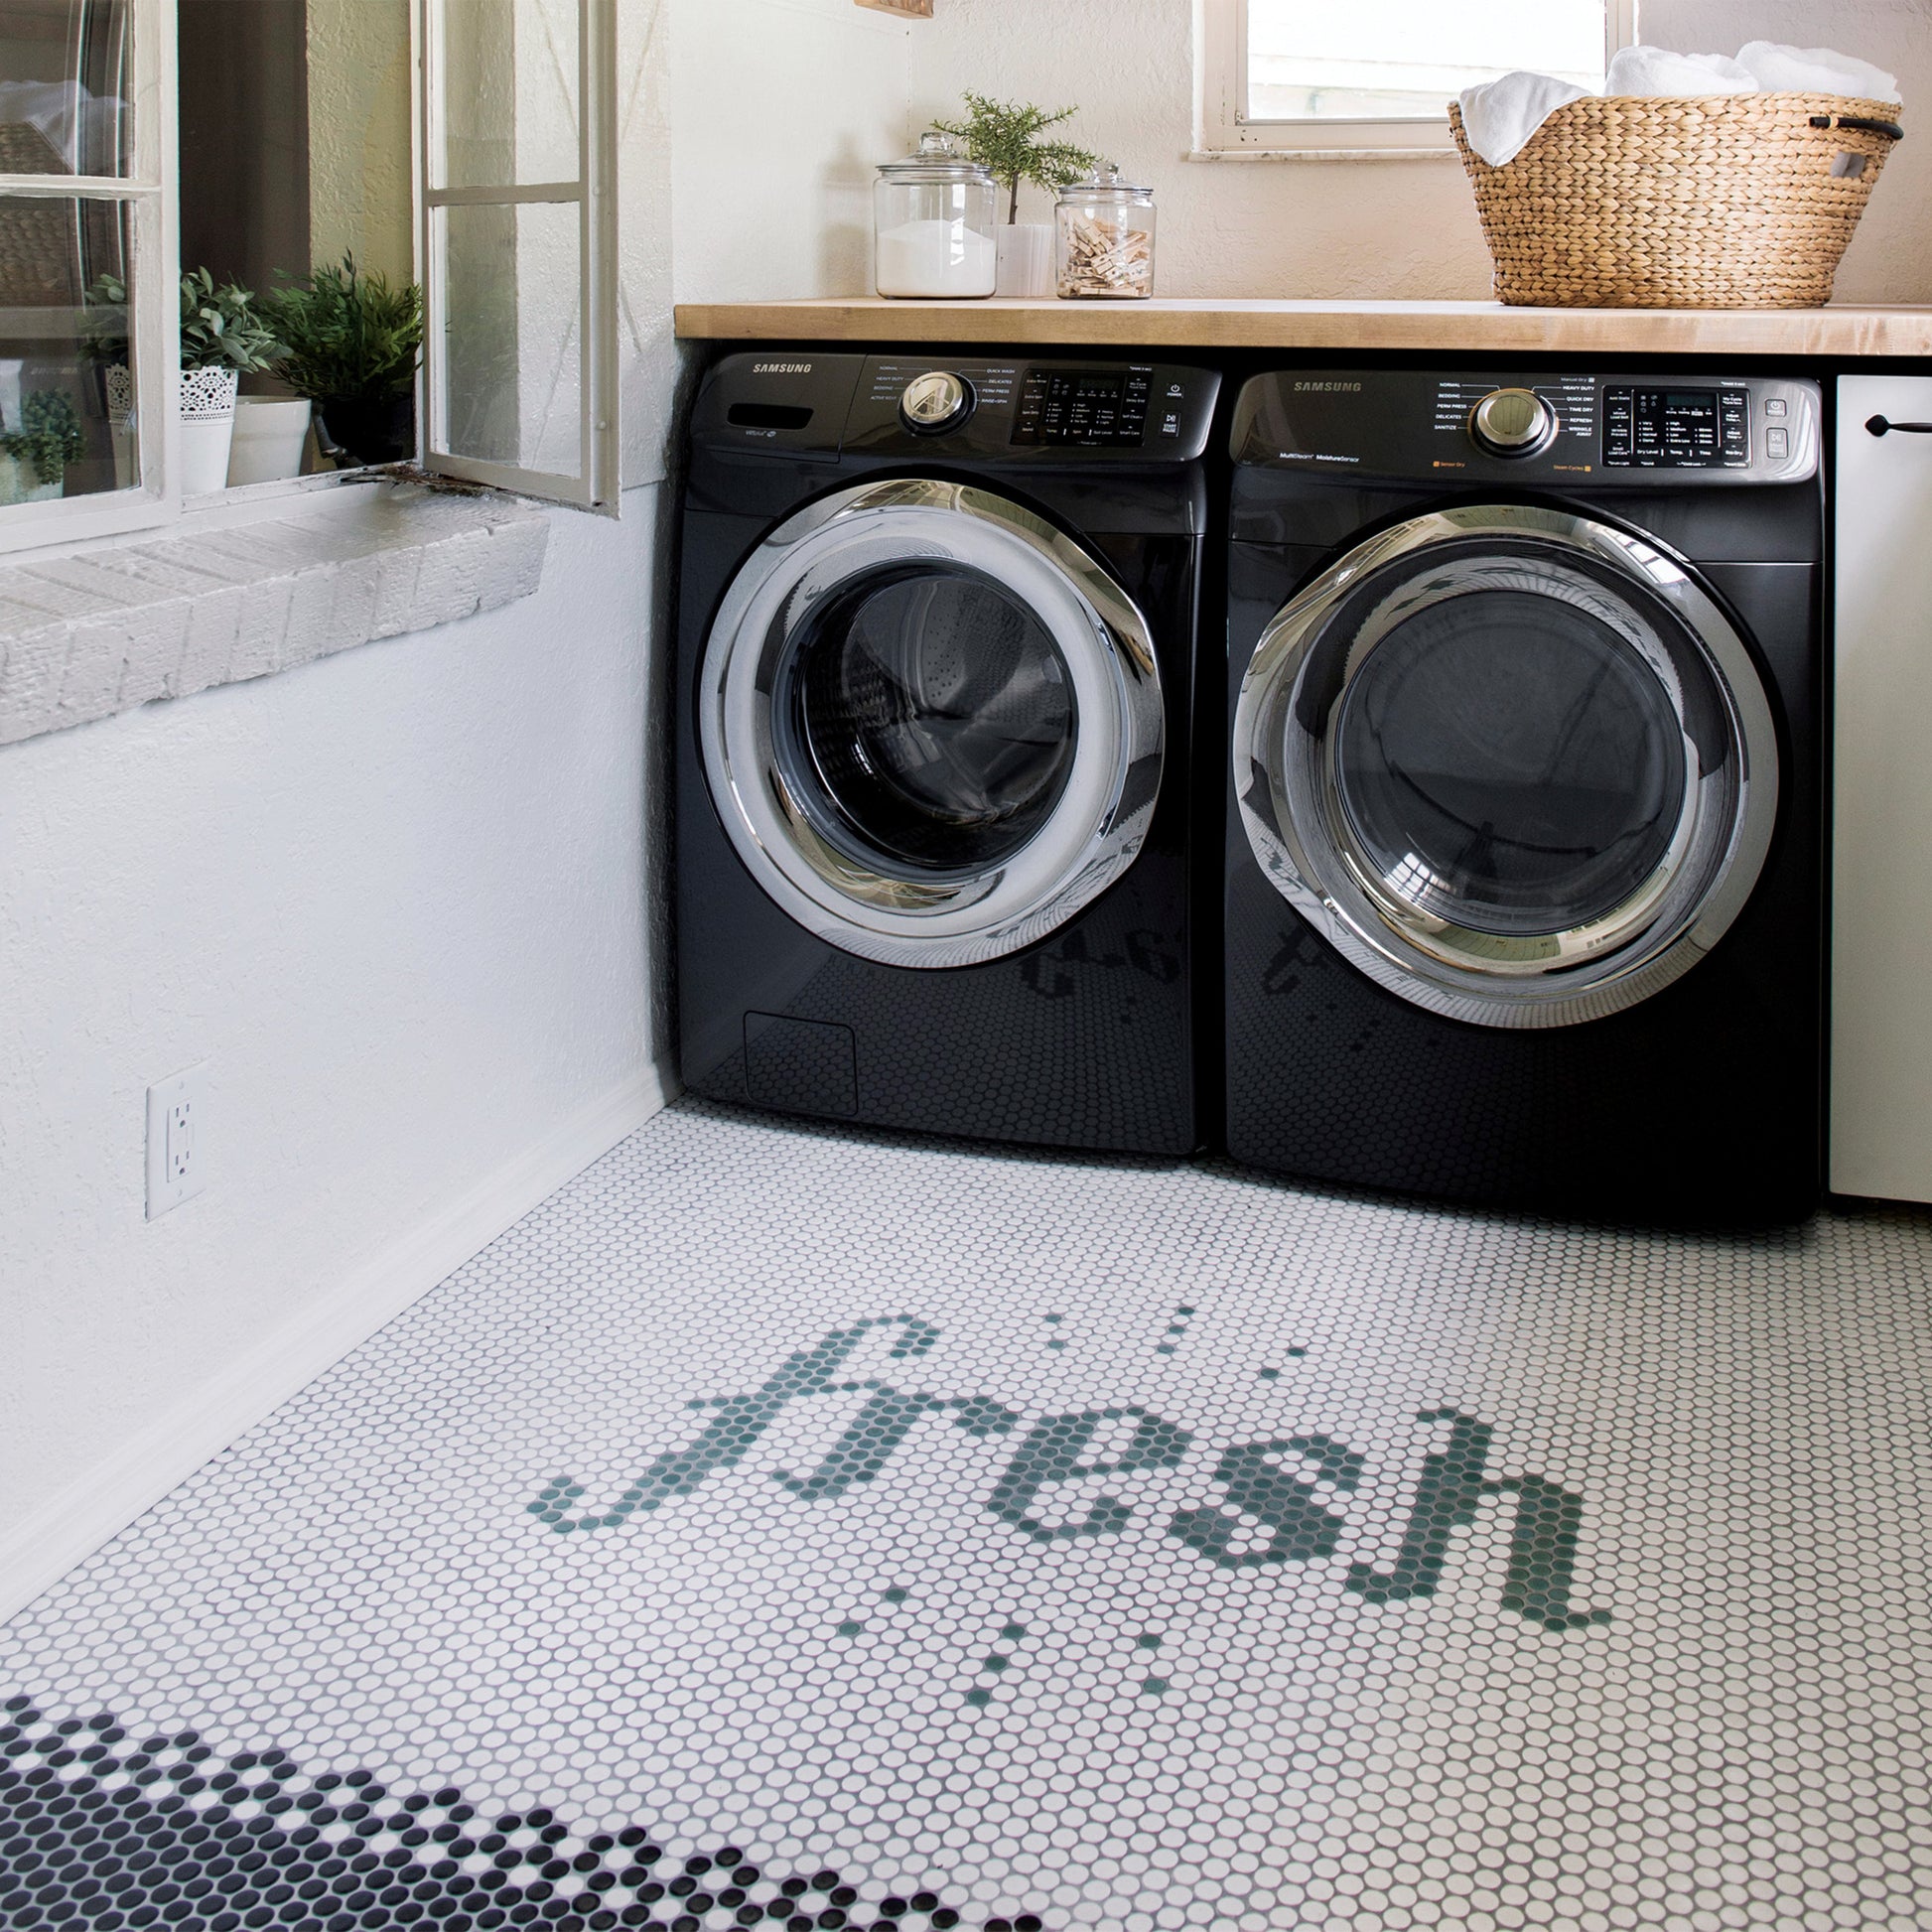 A laundry room with black and silver washer and dryer. The floor is all white penny tile leading into black penny tile. The middle of the floor, in Shale green penny tile, spells out Fresh